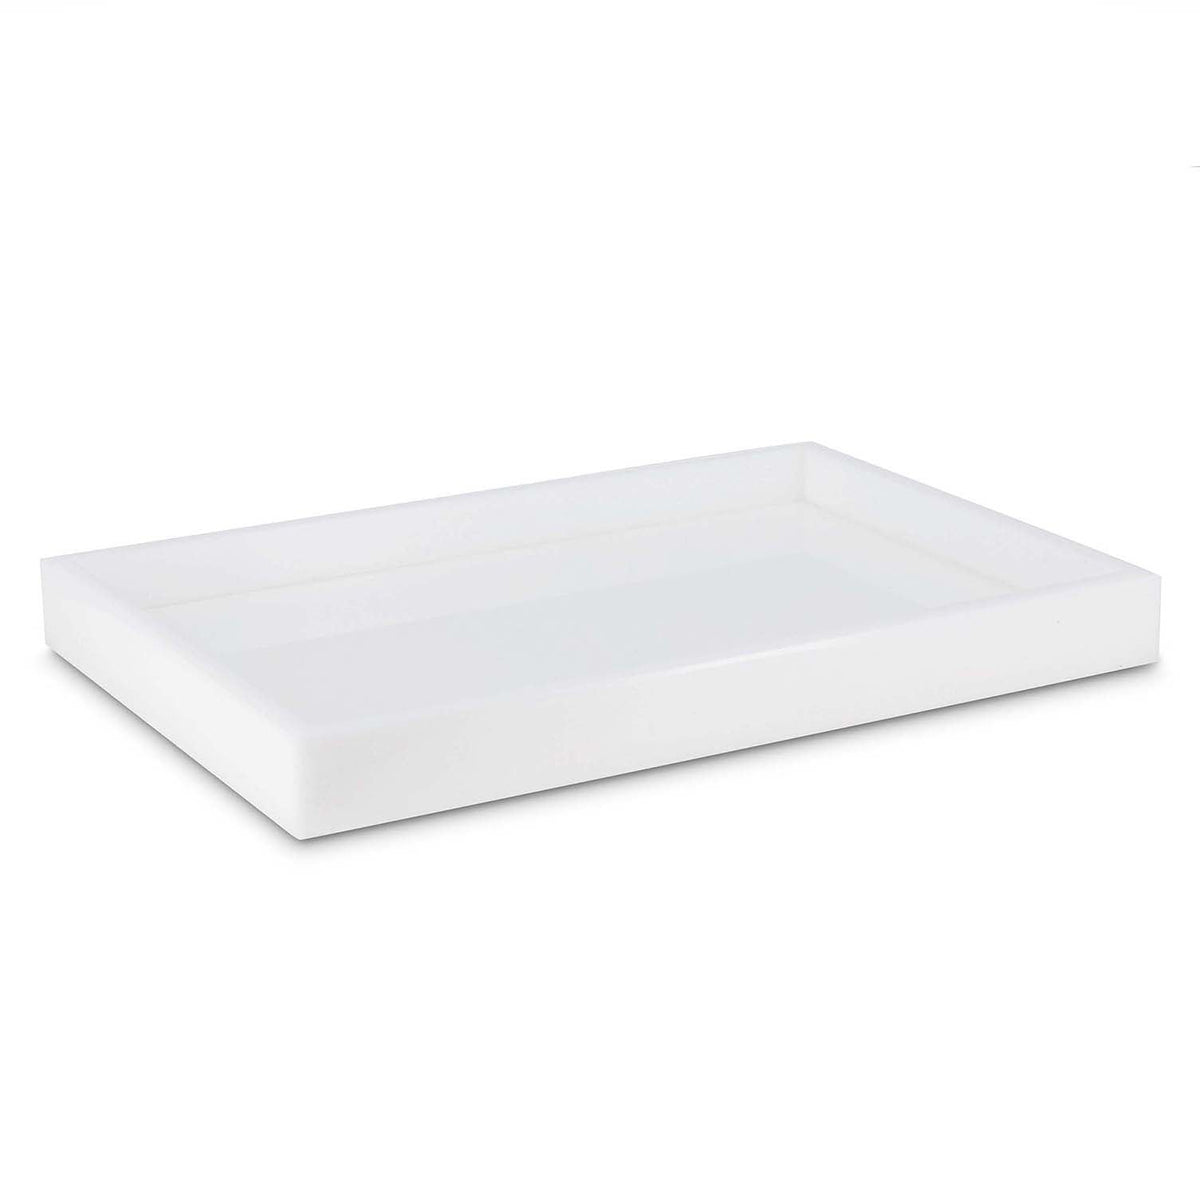 Mike + Ally - Ice White Large Vanity tray - 31617 - White - 